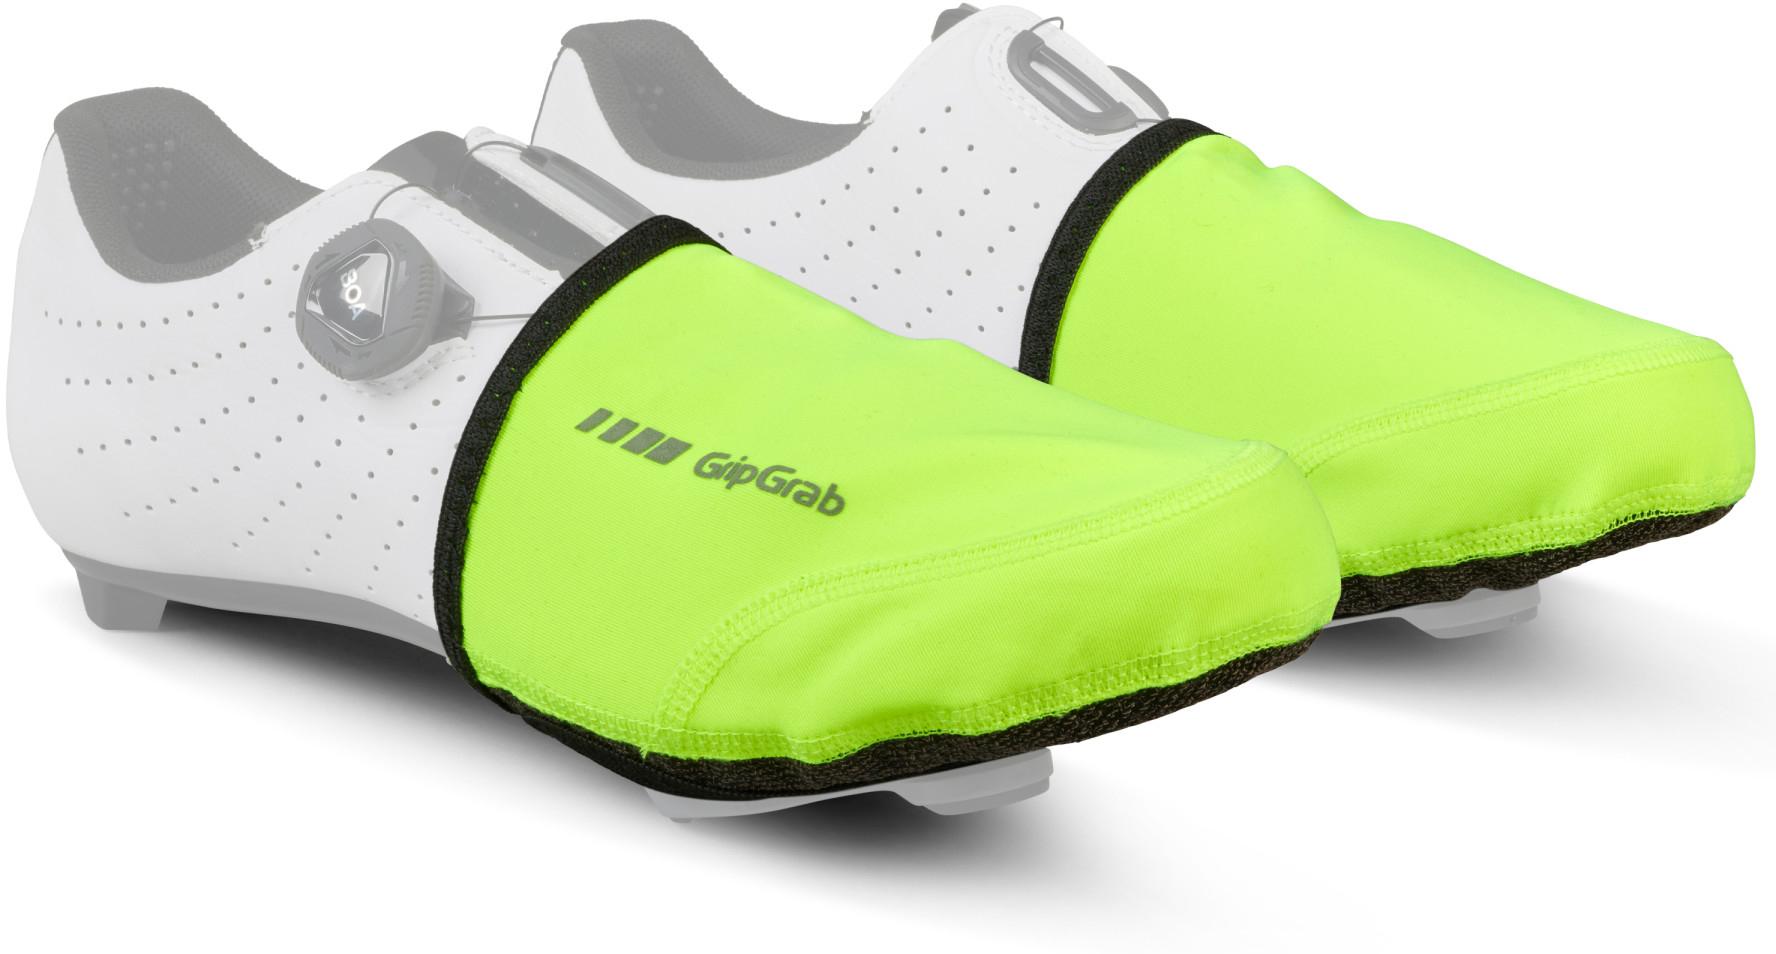 Gripgrab Windproof Hi-vis Toe Cover - Fluorescent Yellow